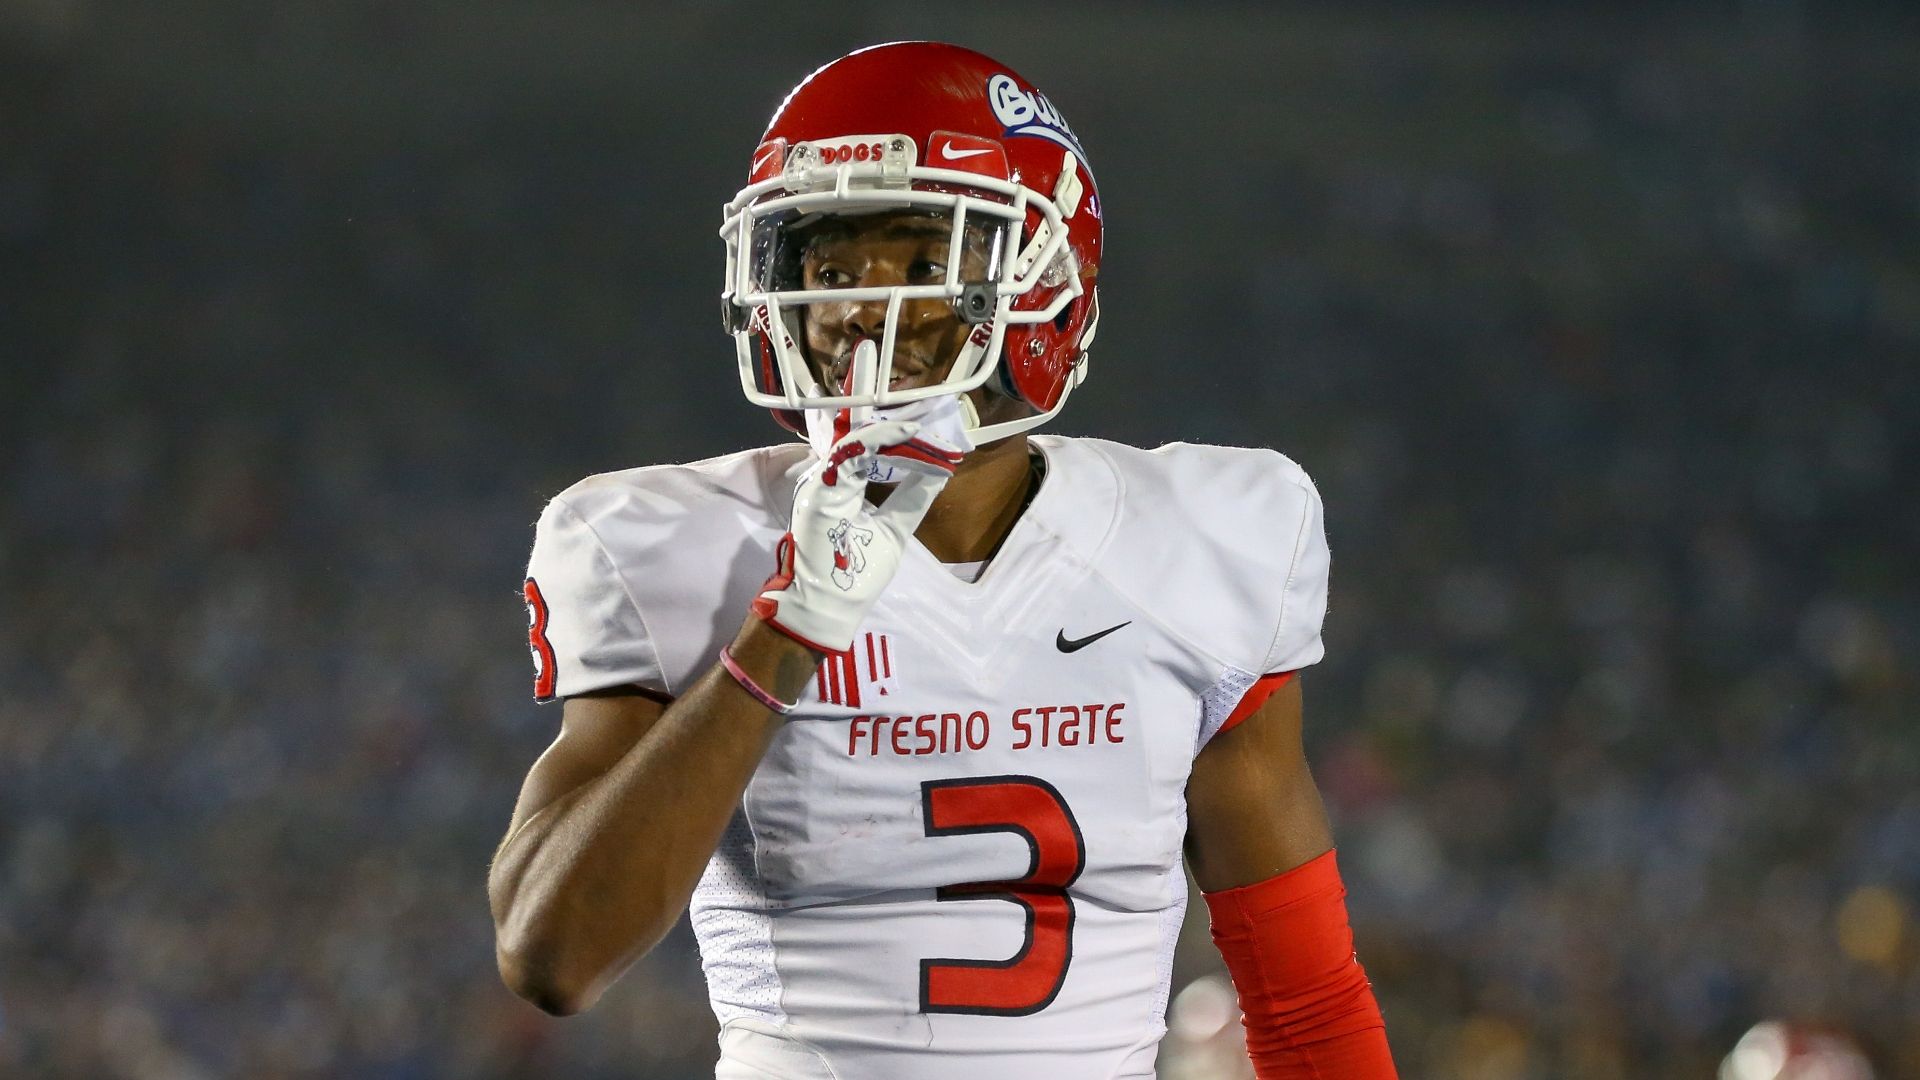 Fresno State WR Keesean Johnson drafted by Cardinals